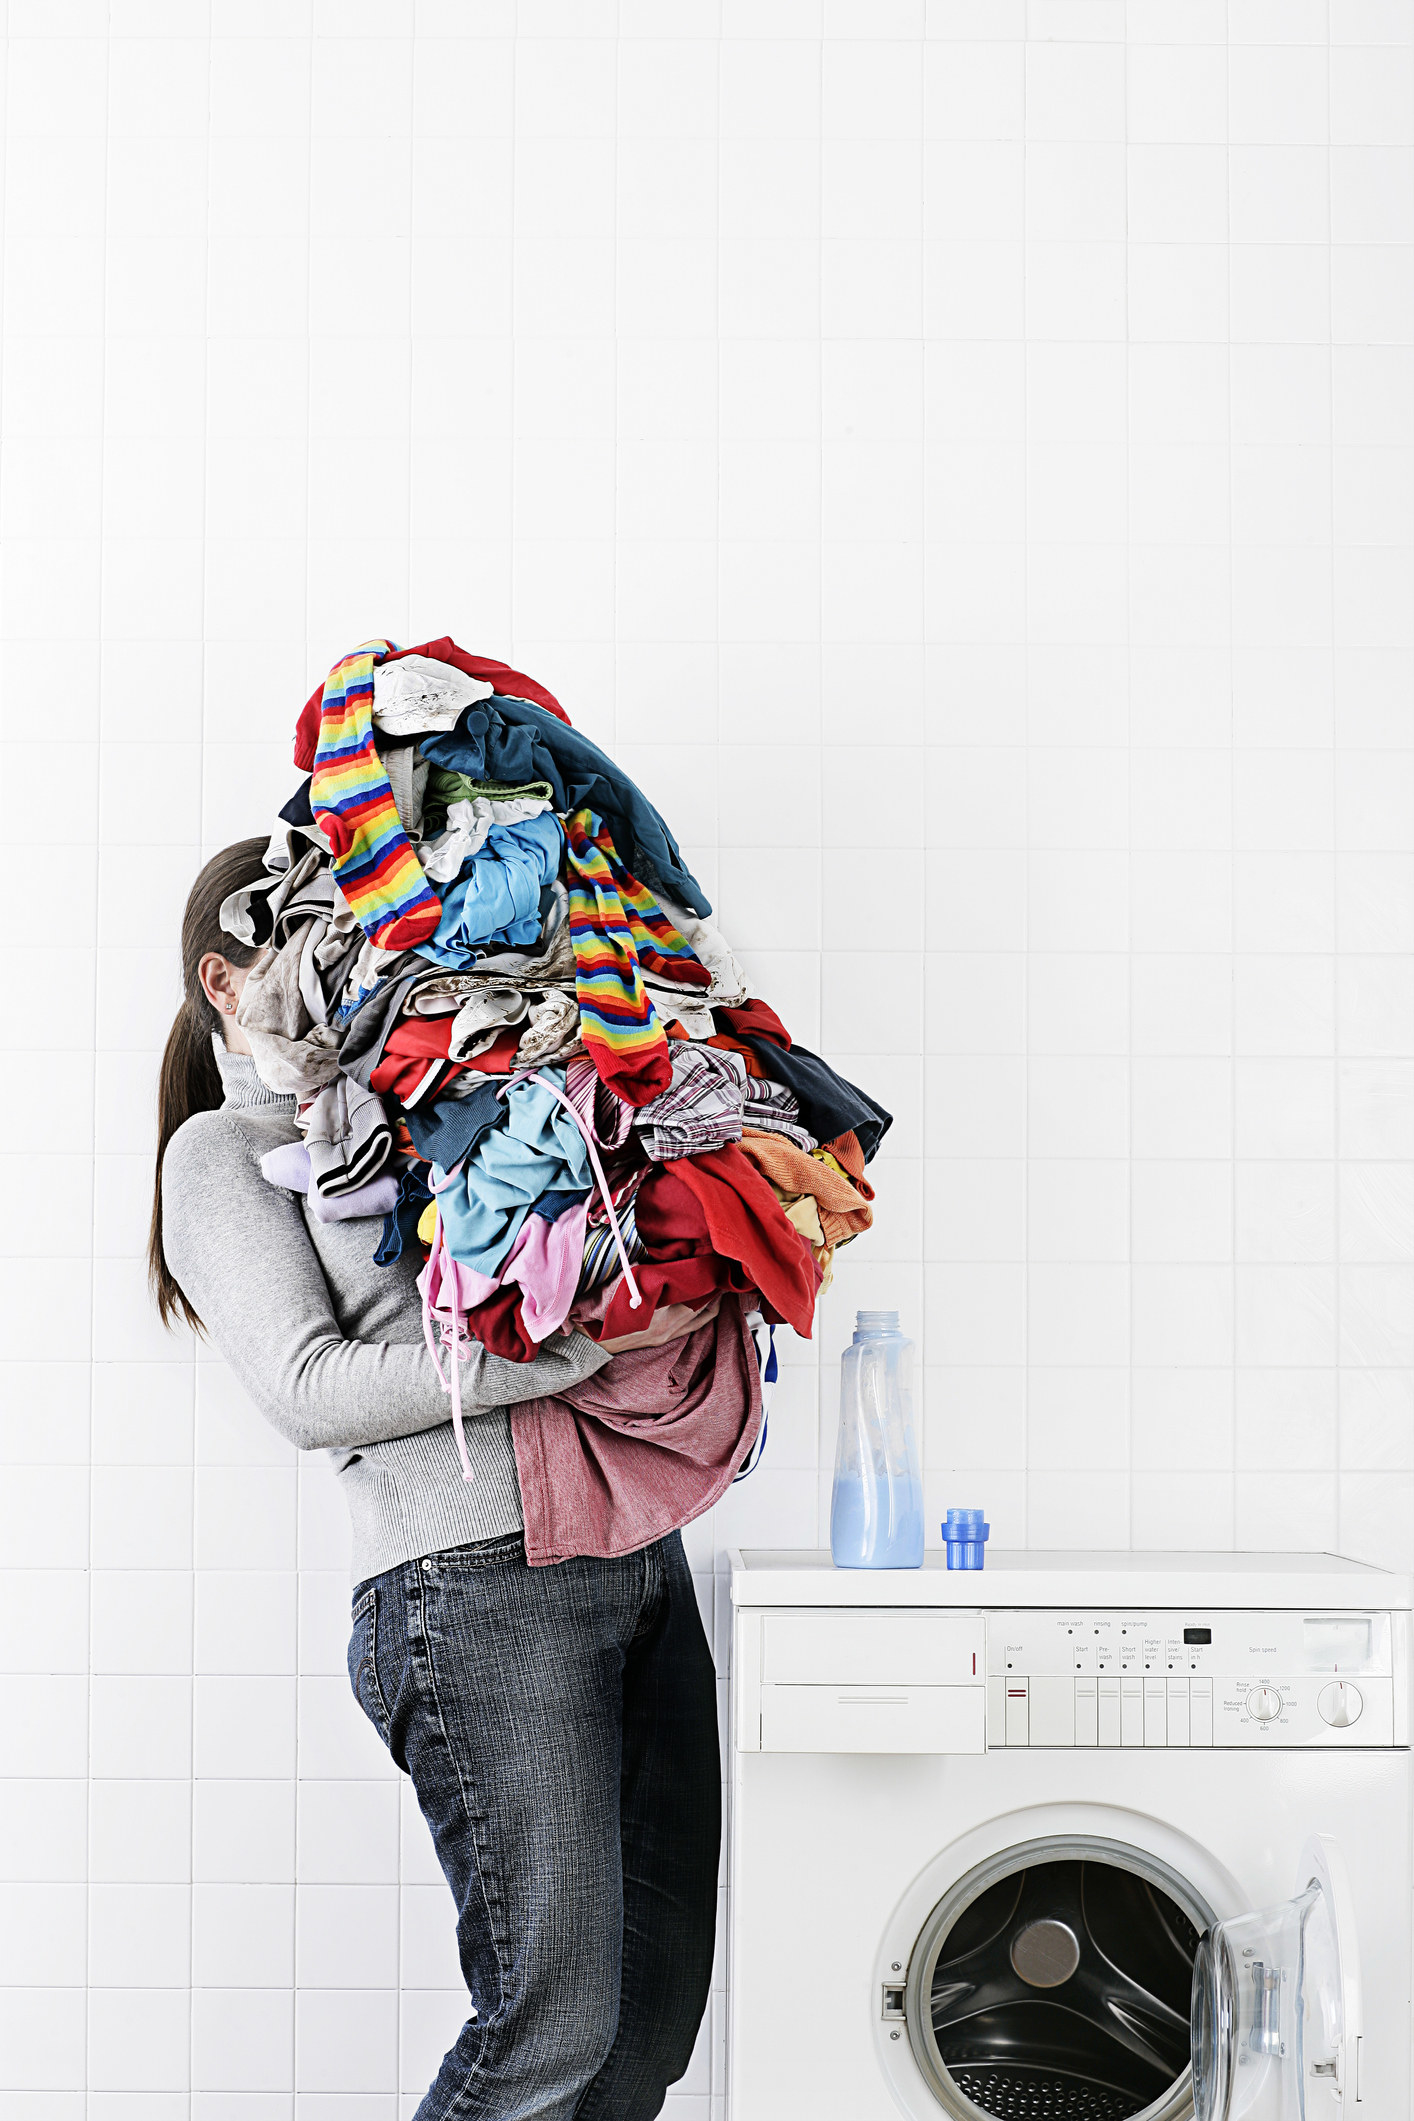 A woman holding a pile of laundry